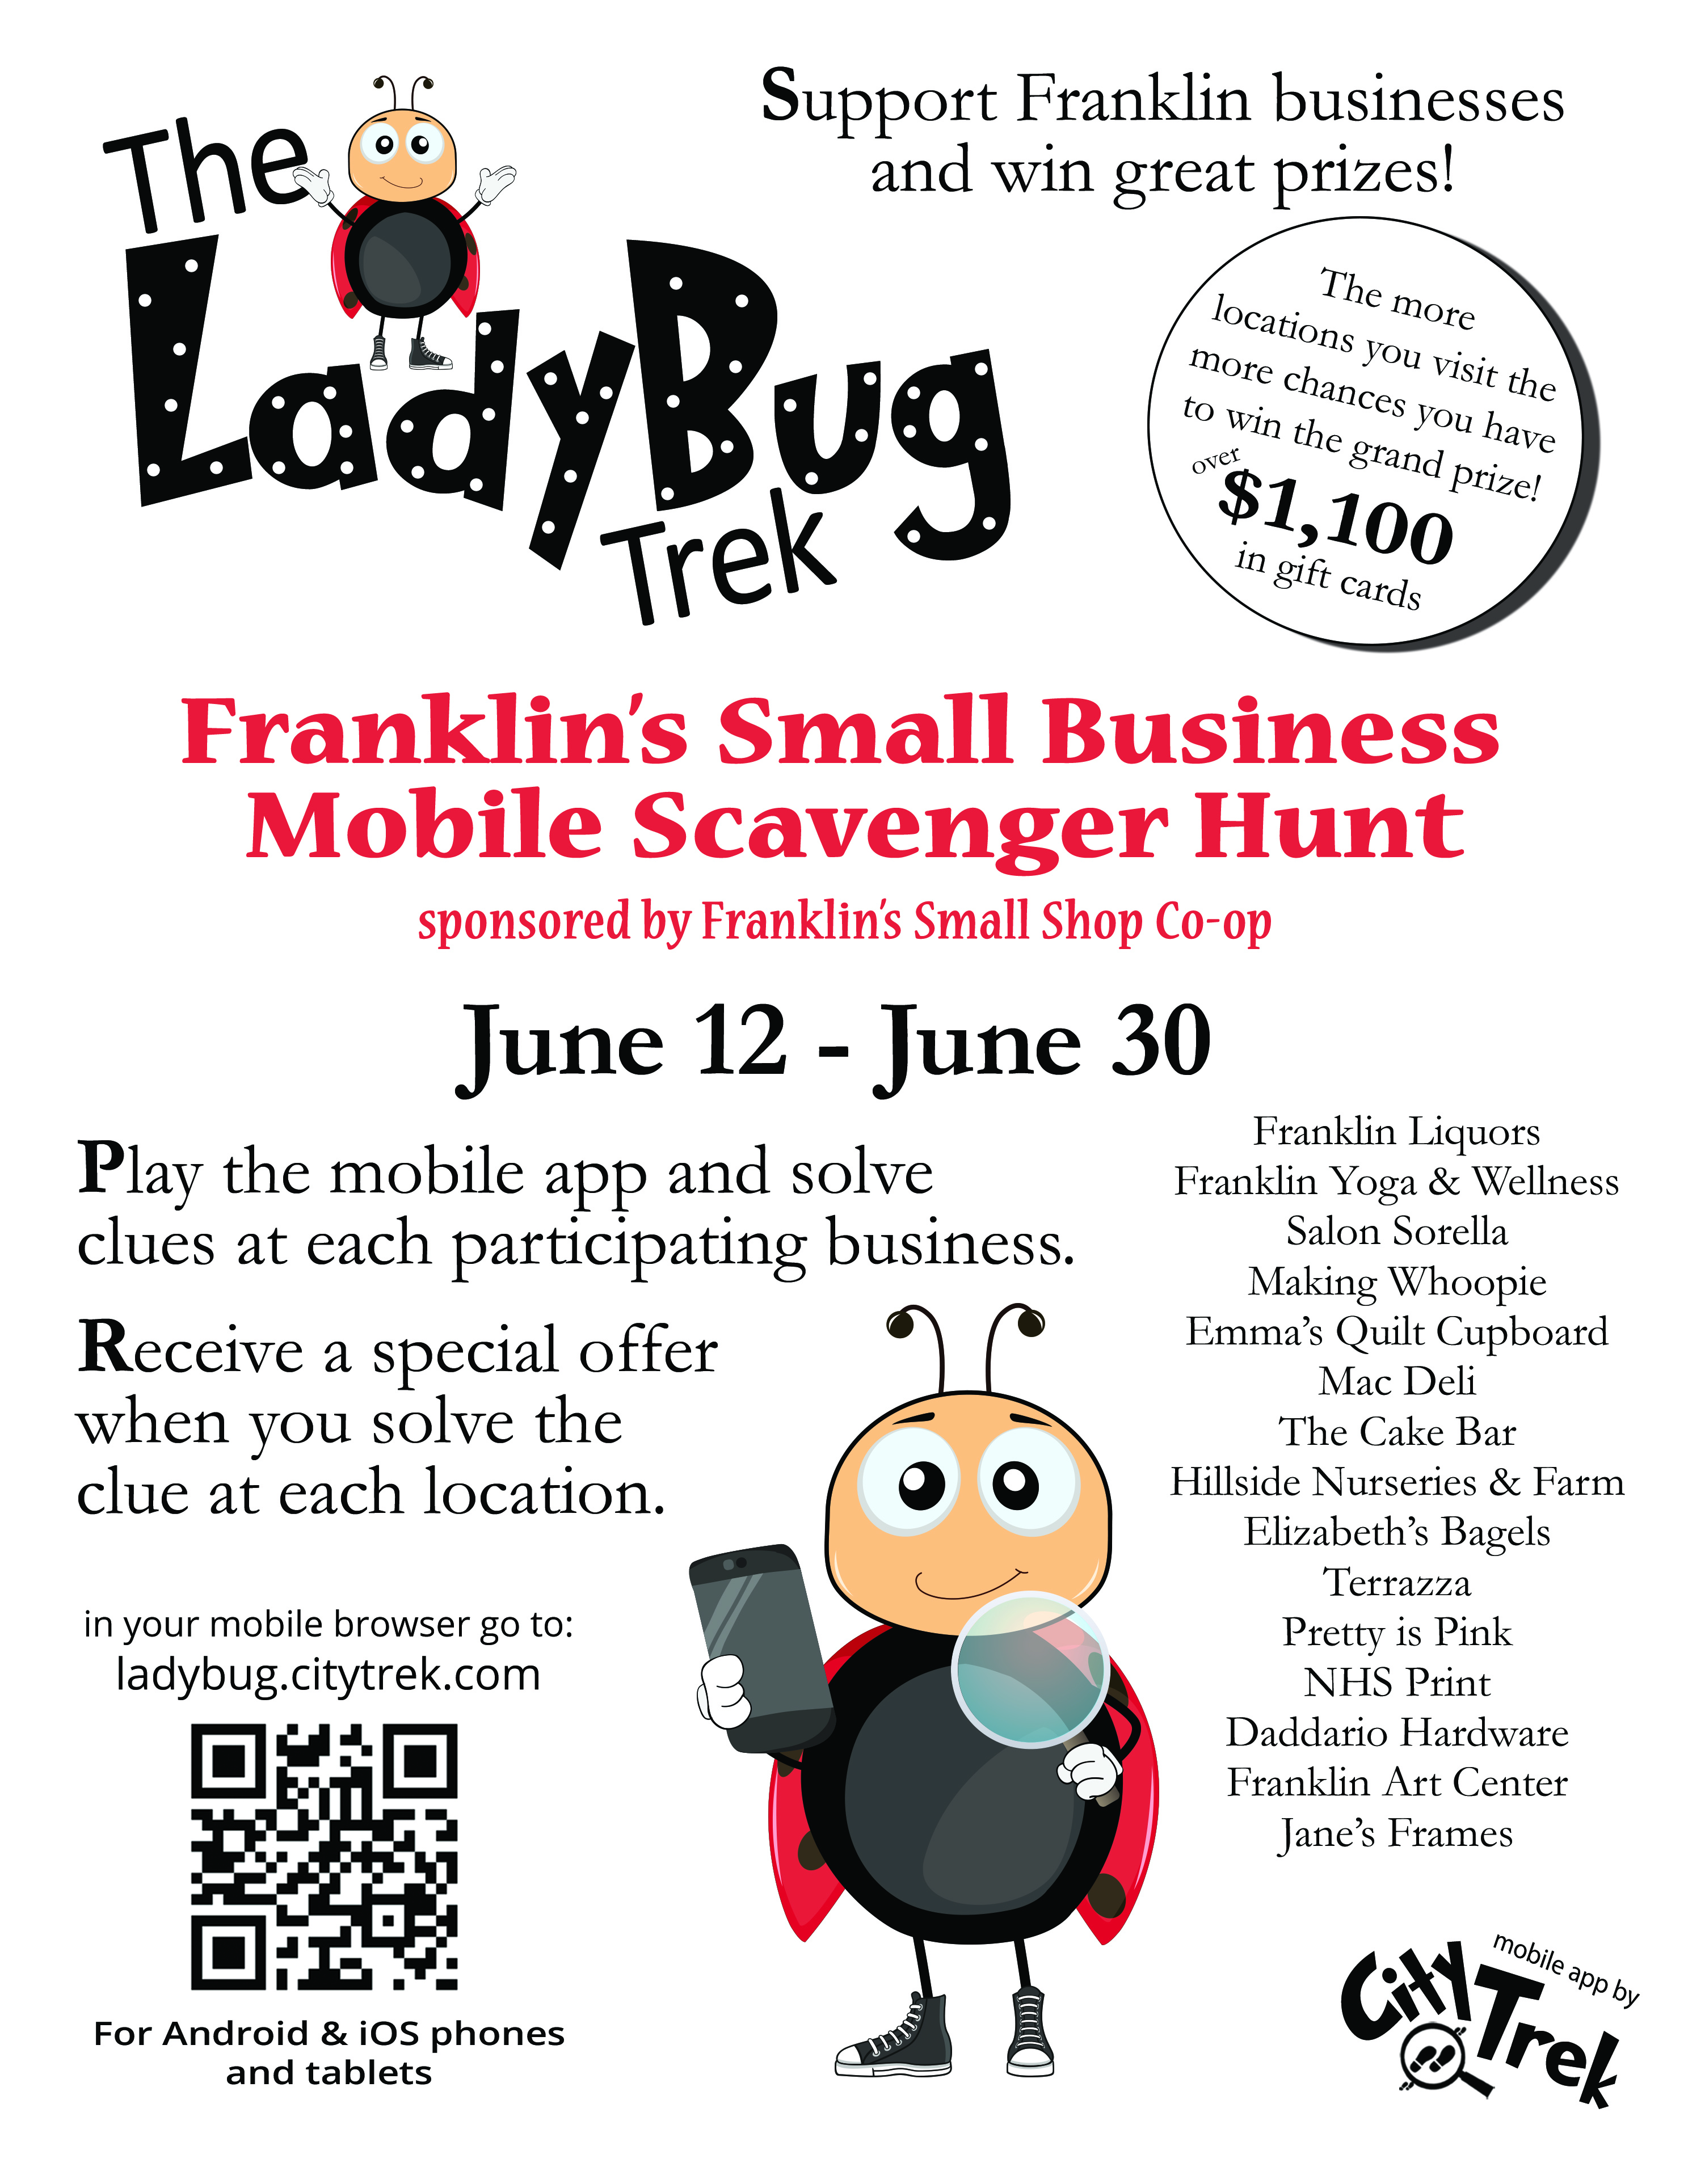 Ladybug Trek - visit some or all of the 15, and get a free entry into the grand prize drawing